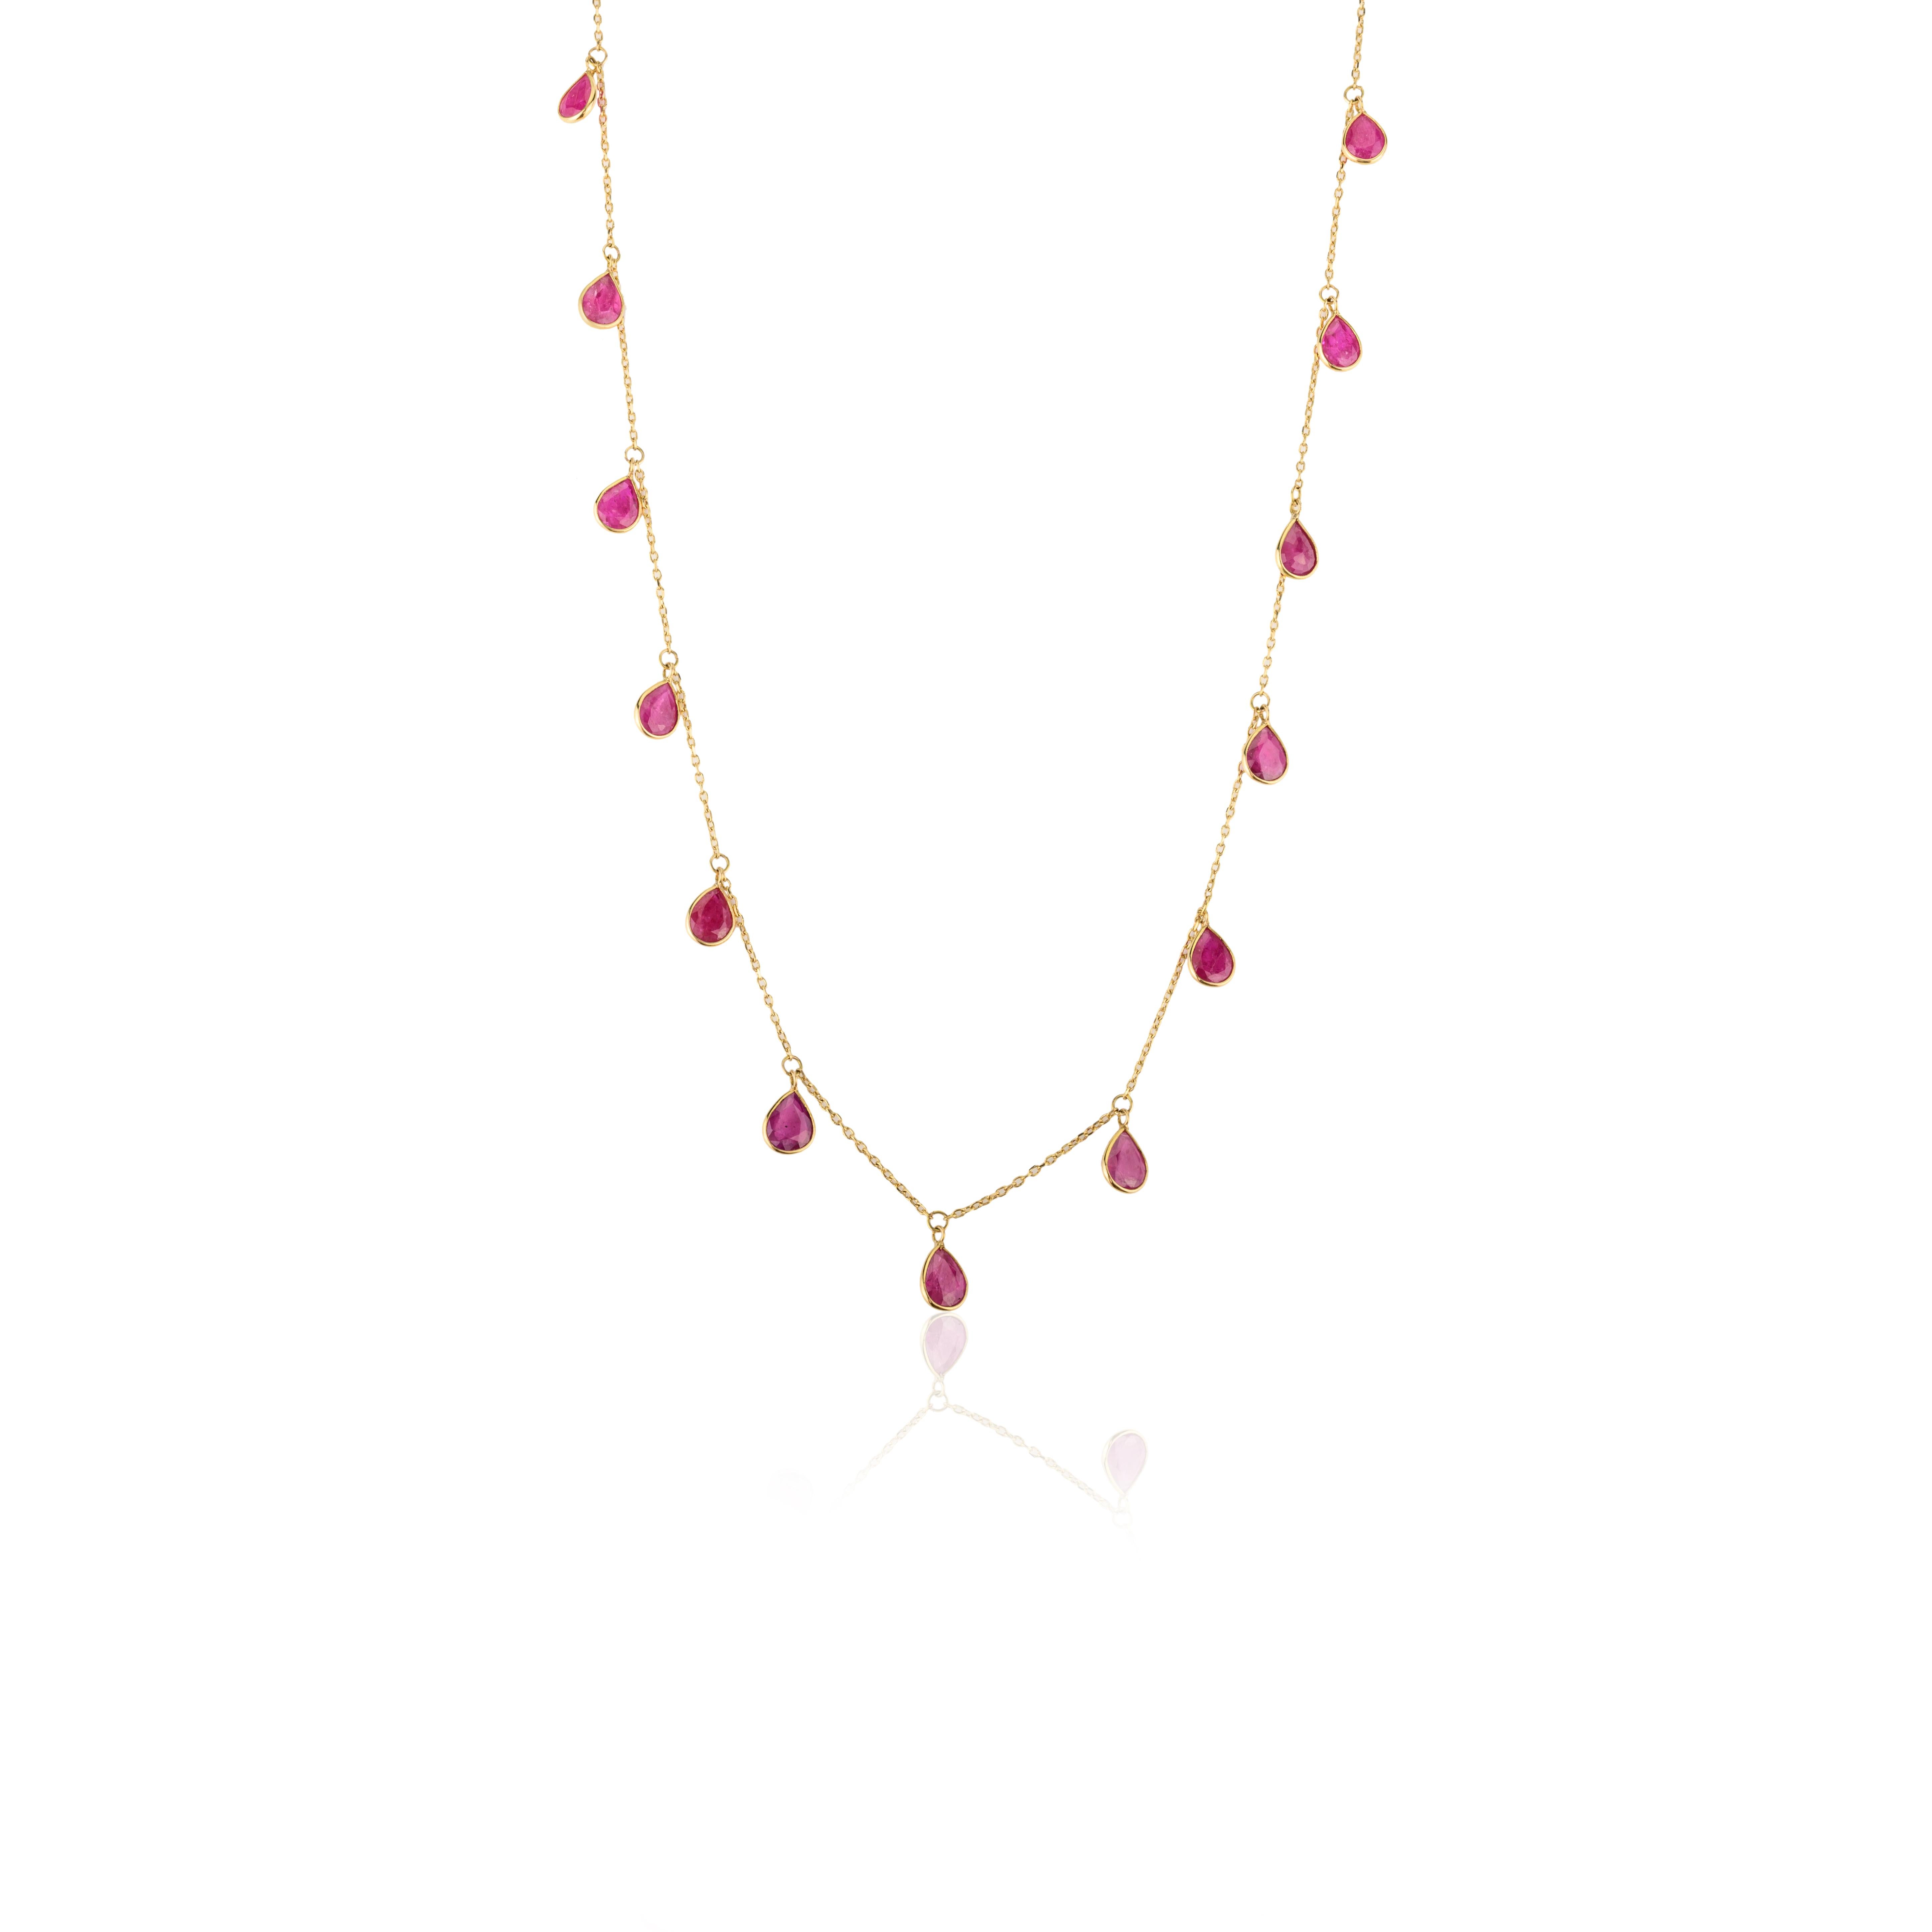 Contemporary Pear Bezel Set Ruby Fringe Necklace in 18 Karat Yellow Gold Gift for Women